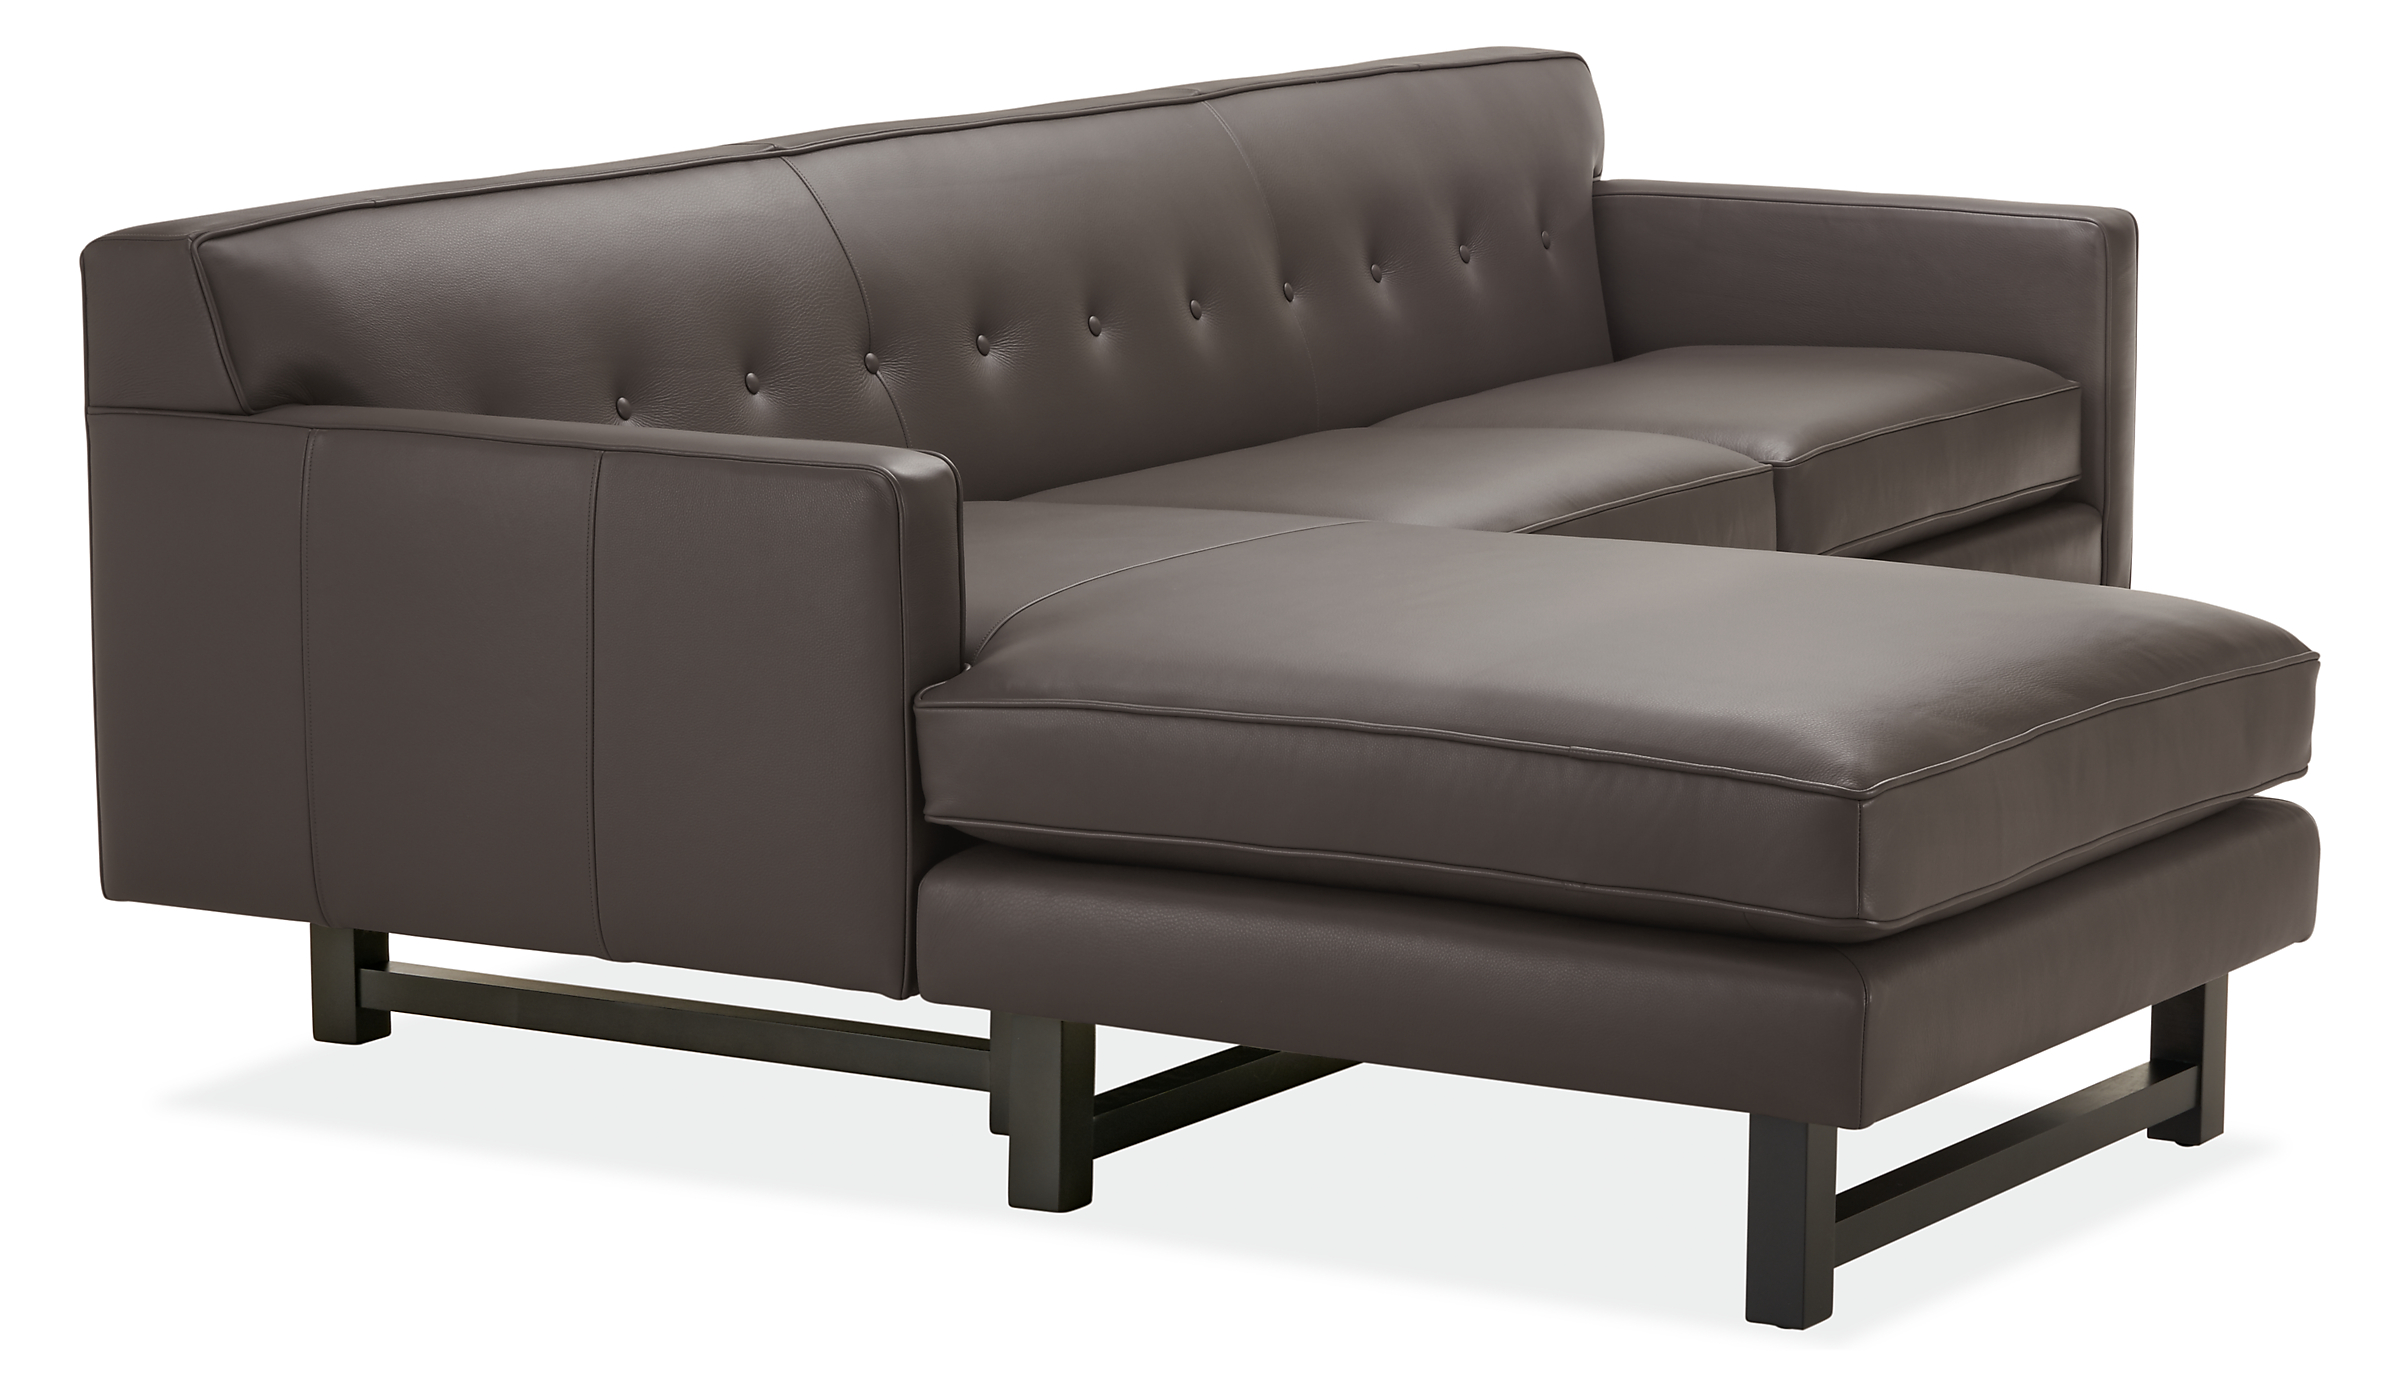 Side View of Andre 101-wide Sofa with Left-Arm Chaise in Urbino Smoke.